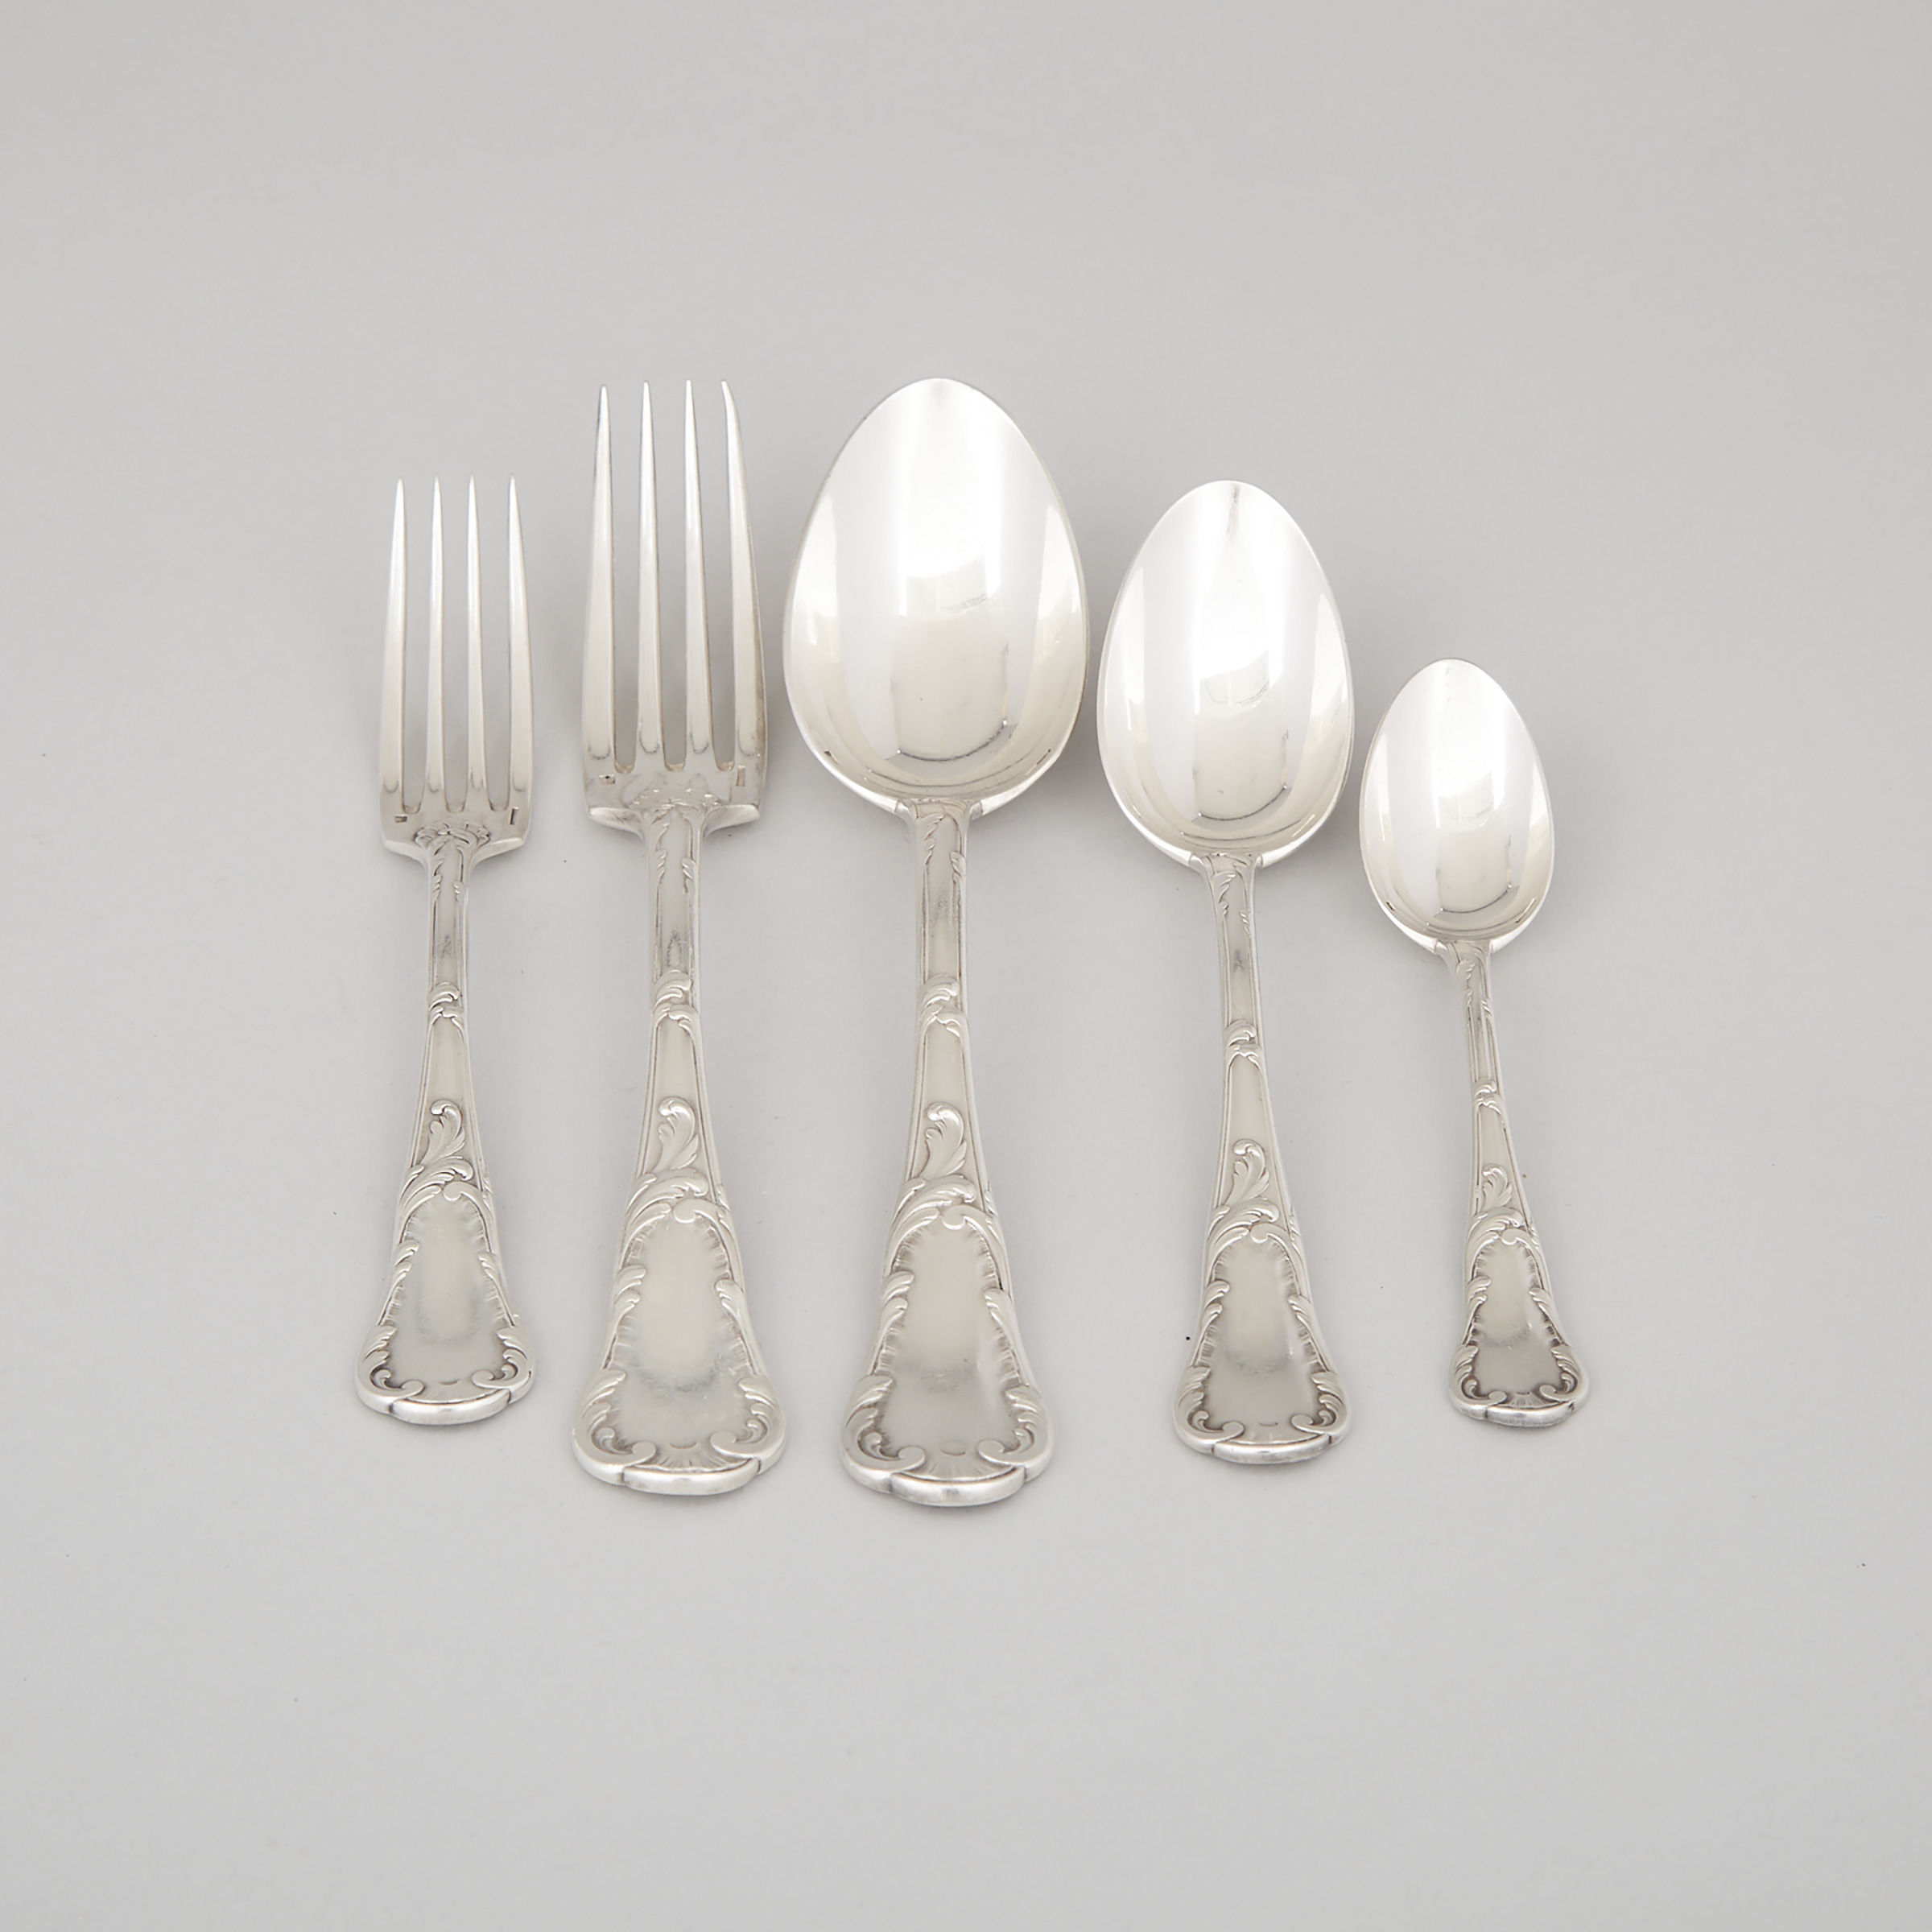 French Silver Plated 'Louis XV Chrysanthemum' Pattern Flatware, Christofle, early 20th century